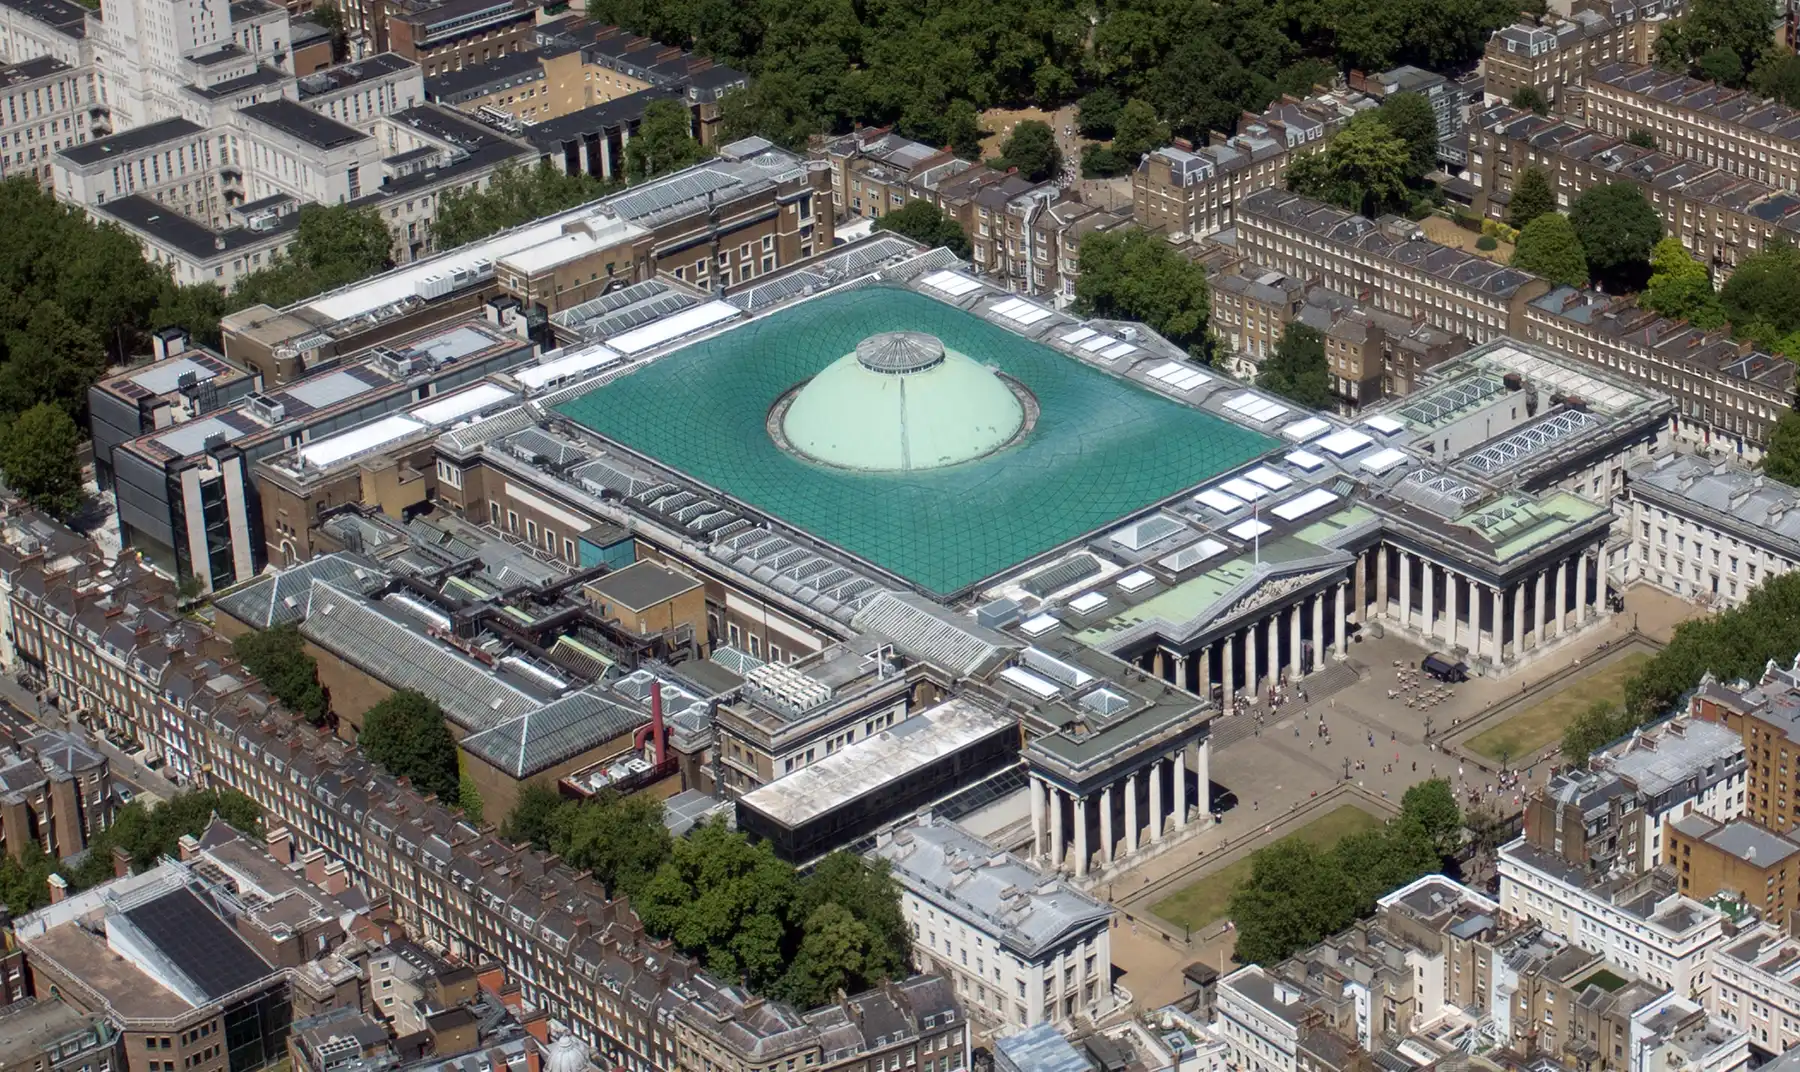 The British Museum was the most visited UK attraction. Picture: Luke Massey/Greater London National Park City Initiative